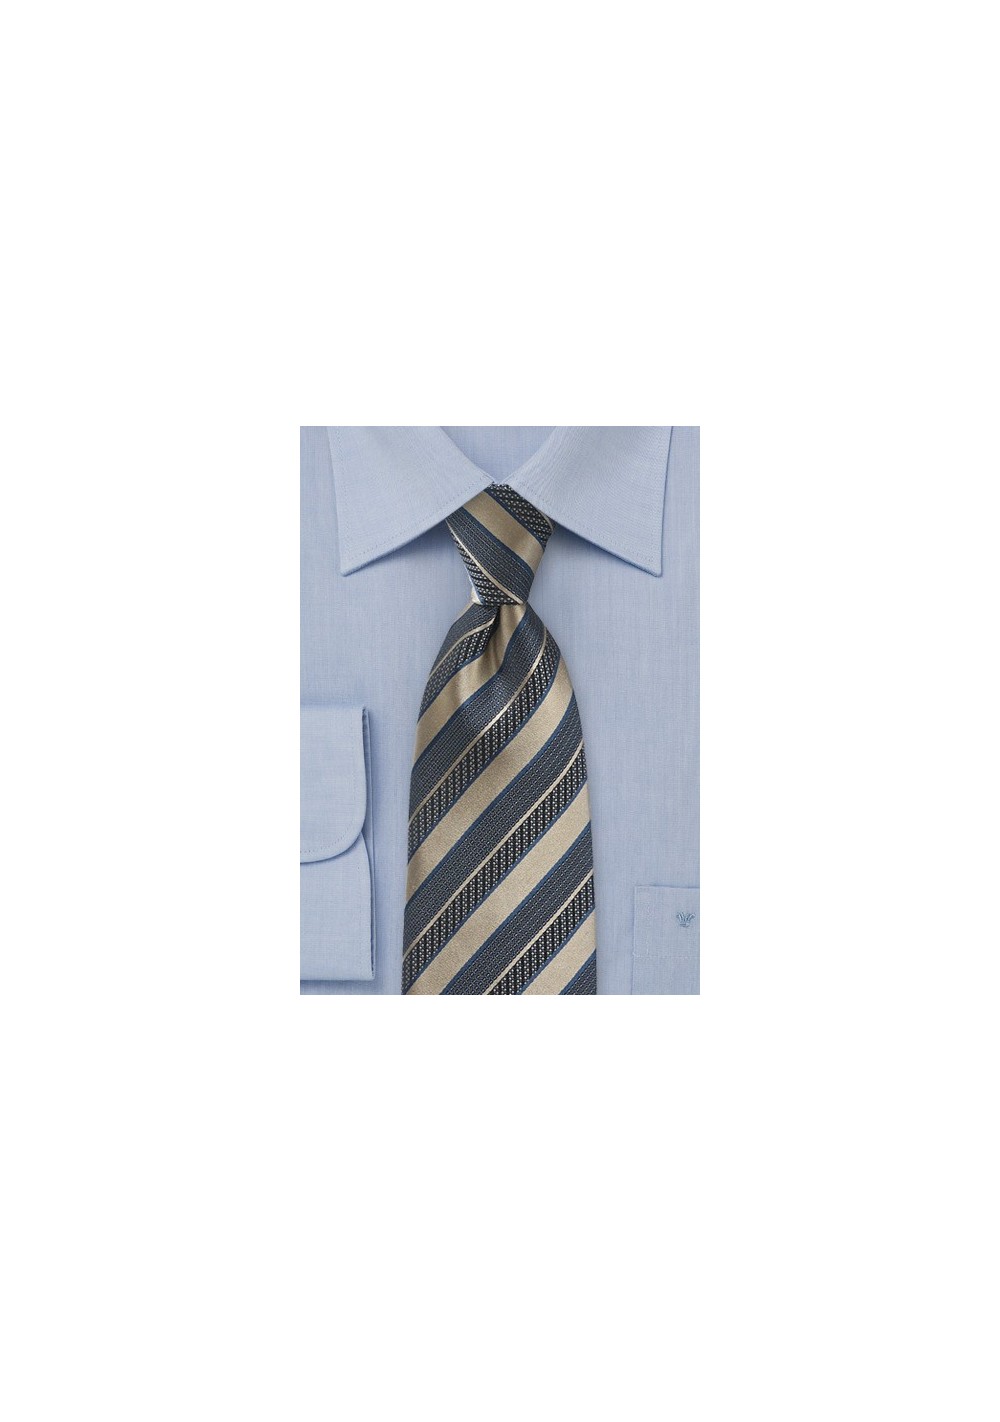 Regal Striped Tie in Vintage Gold and Navy